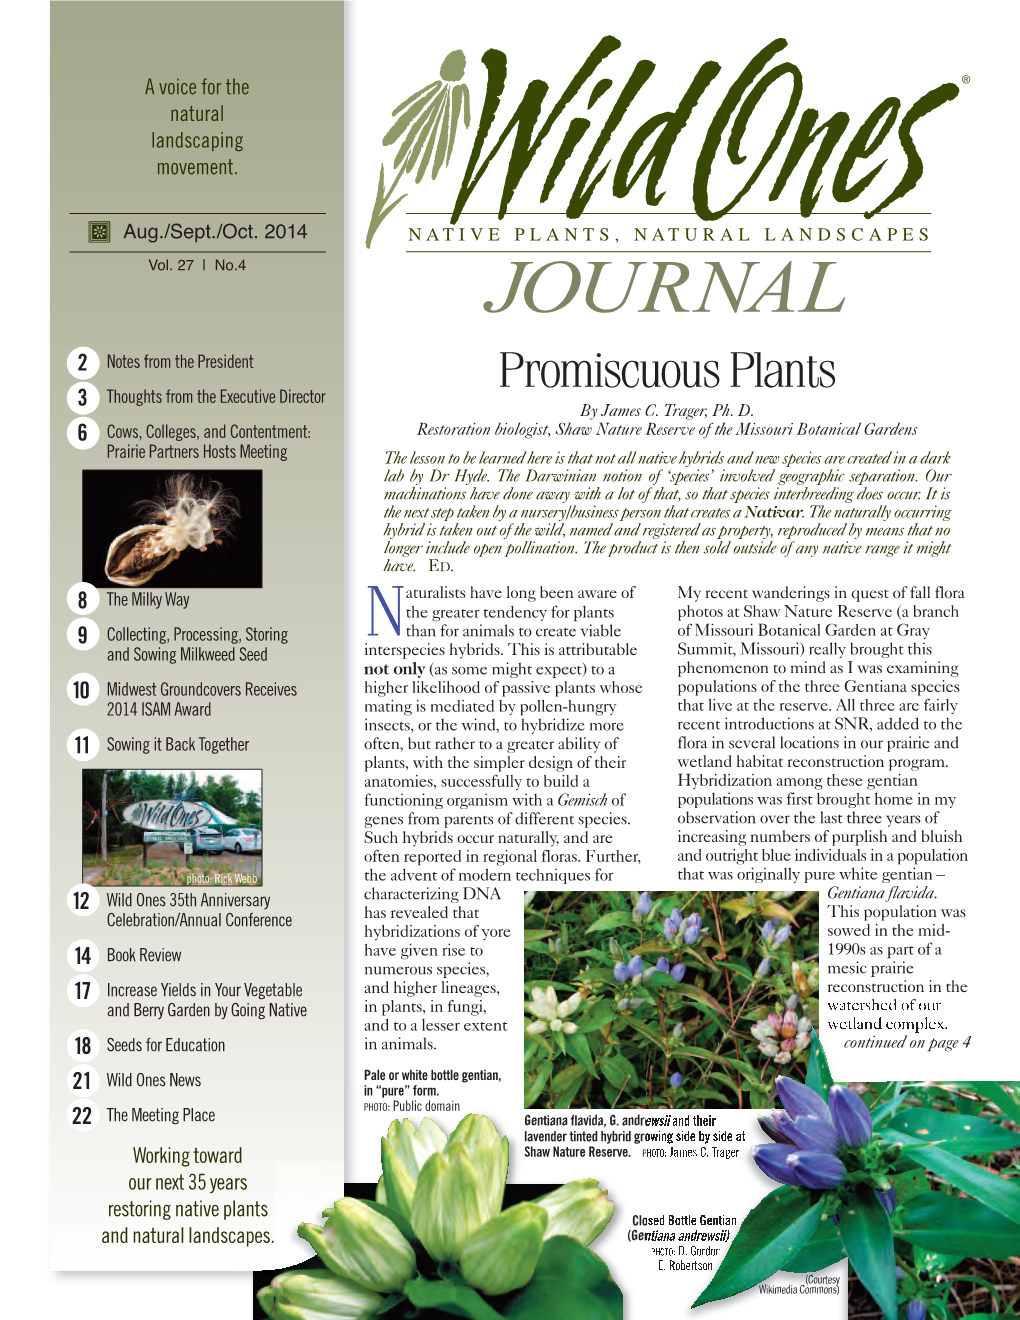 JOURNAL 2 Notes from the President Promiscuous Plants 3 Thoughts from the Executive Director by James C